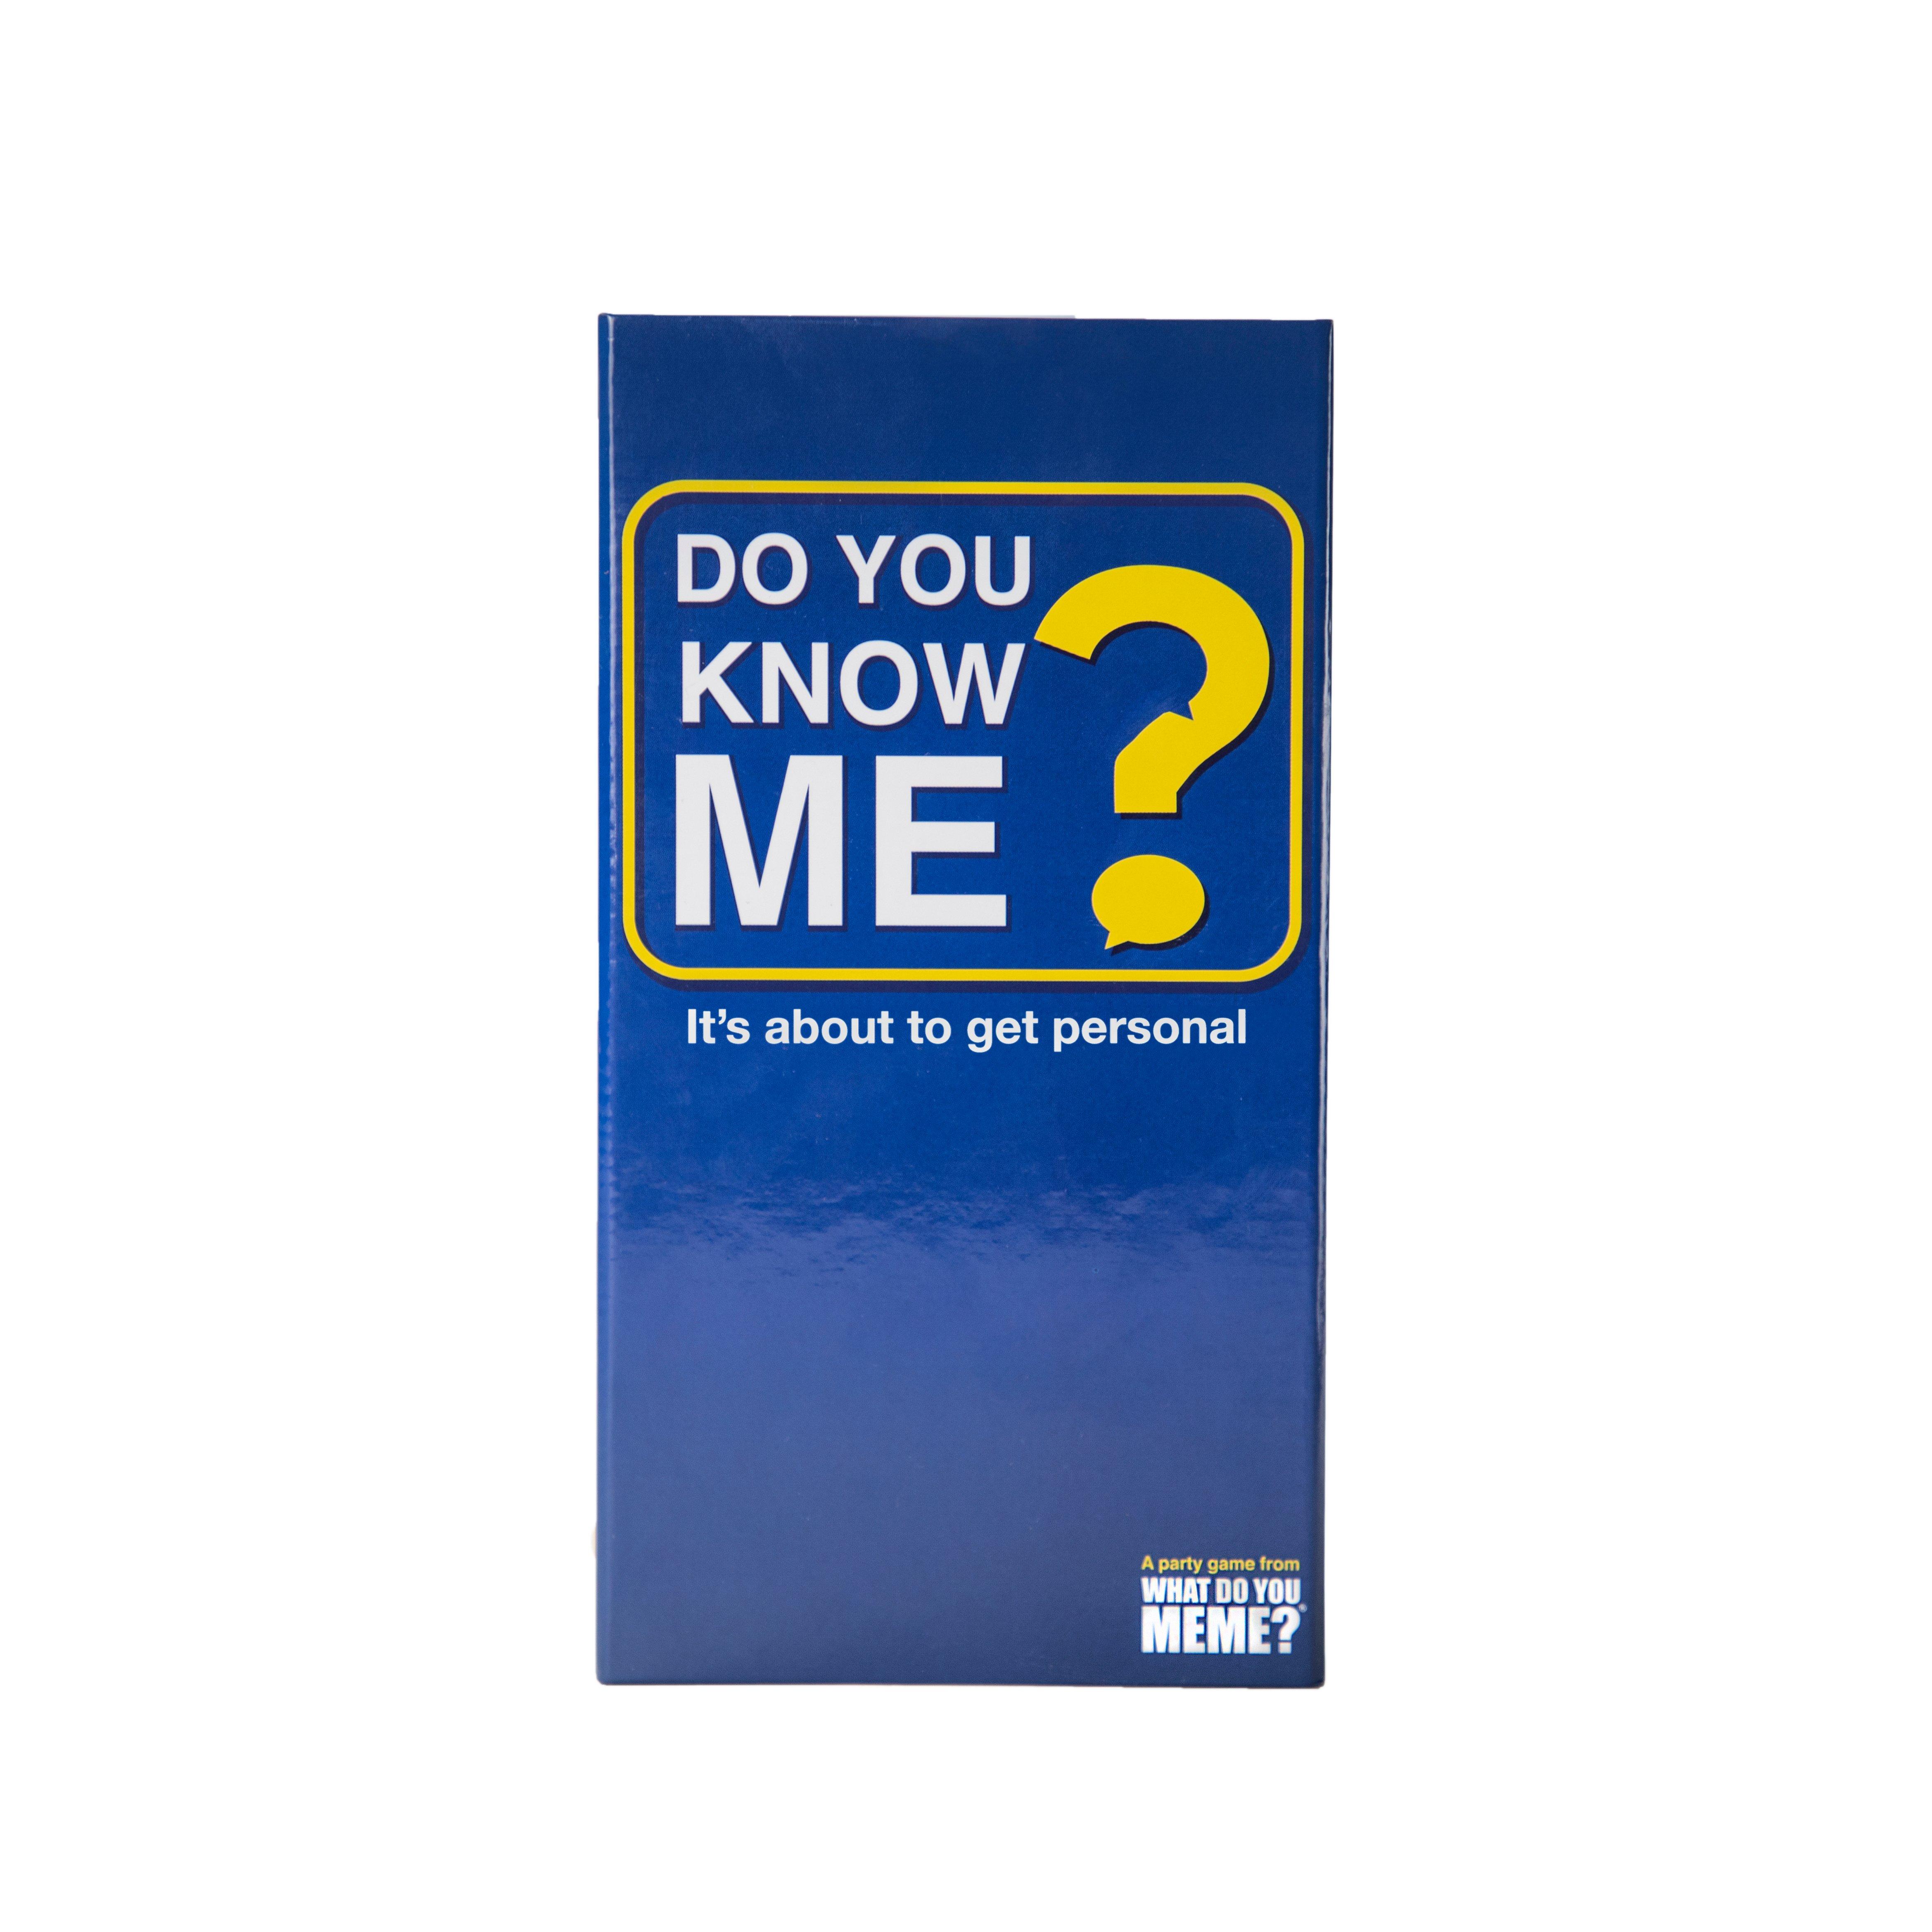 Do You Know Me? Card Game